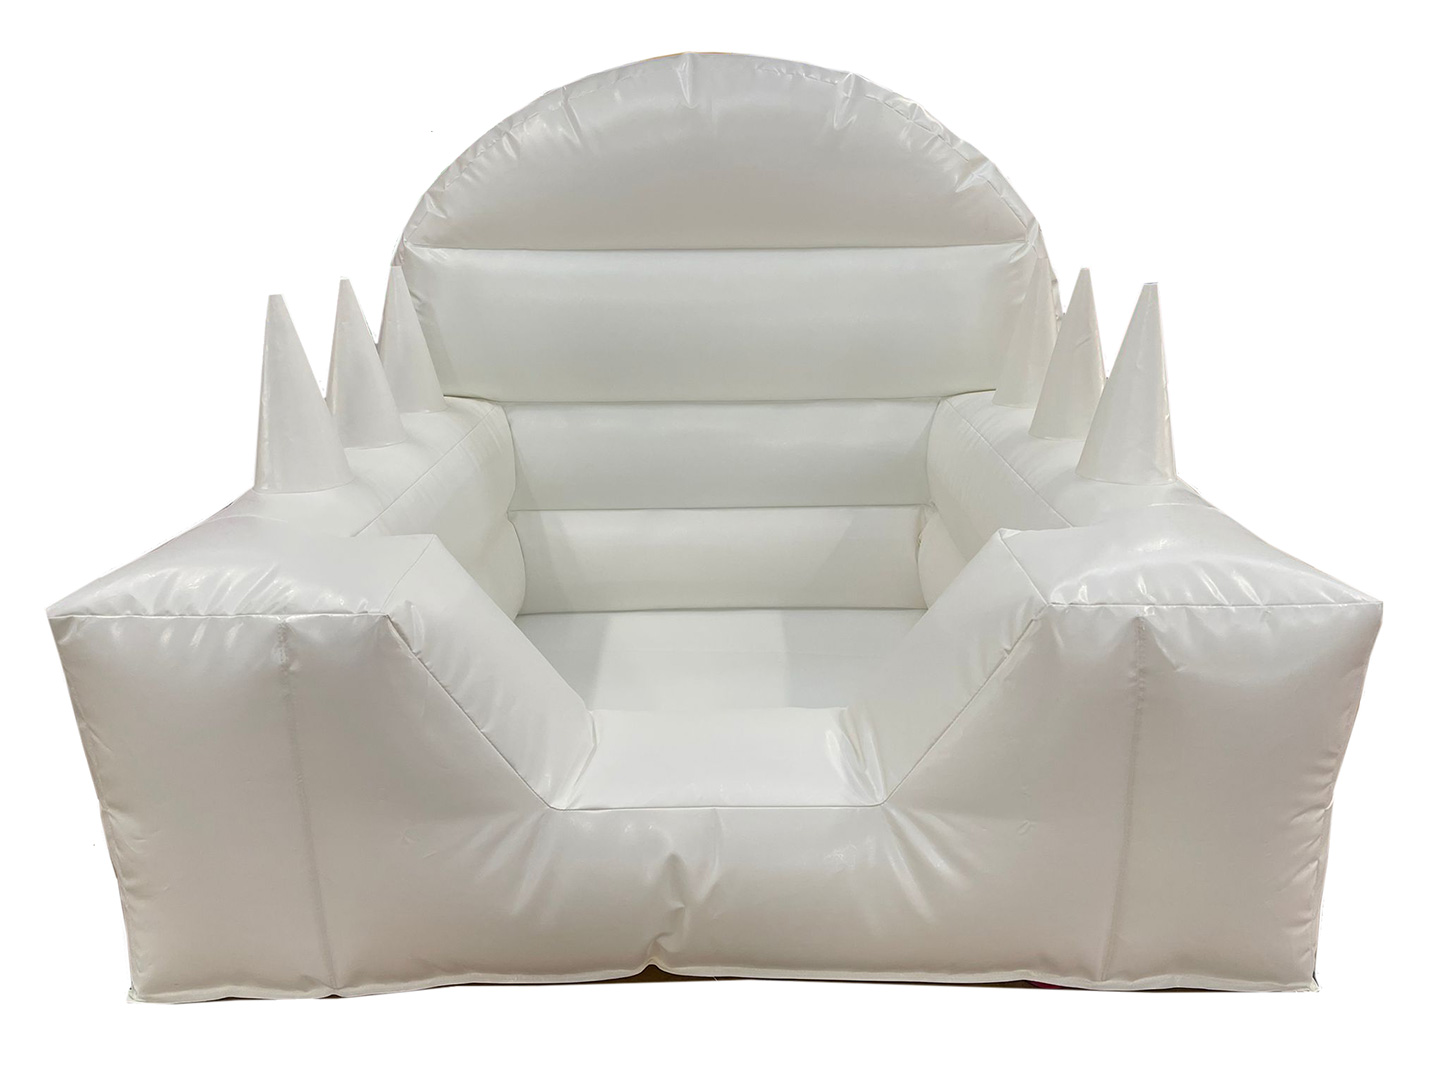 Bouncy Castle Sales - BC645 - Bouncy Inflatable for sale